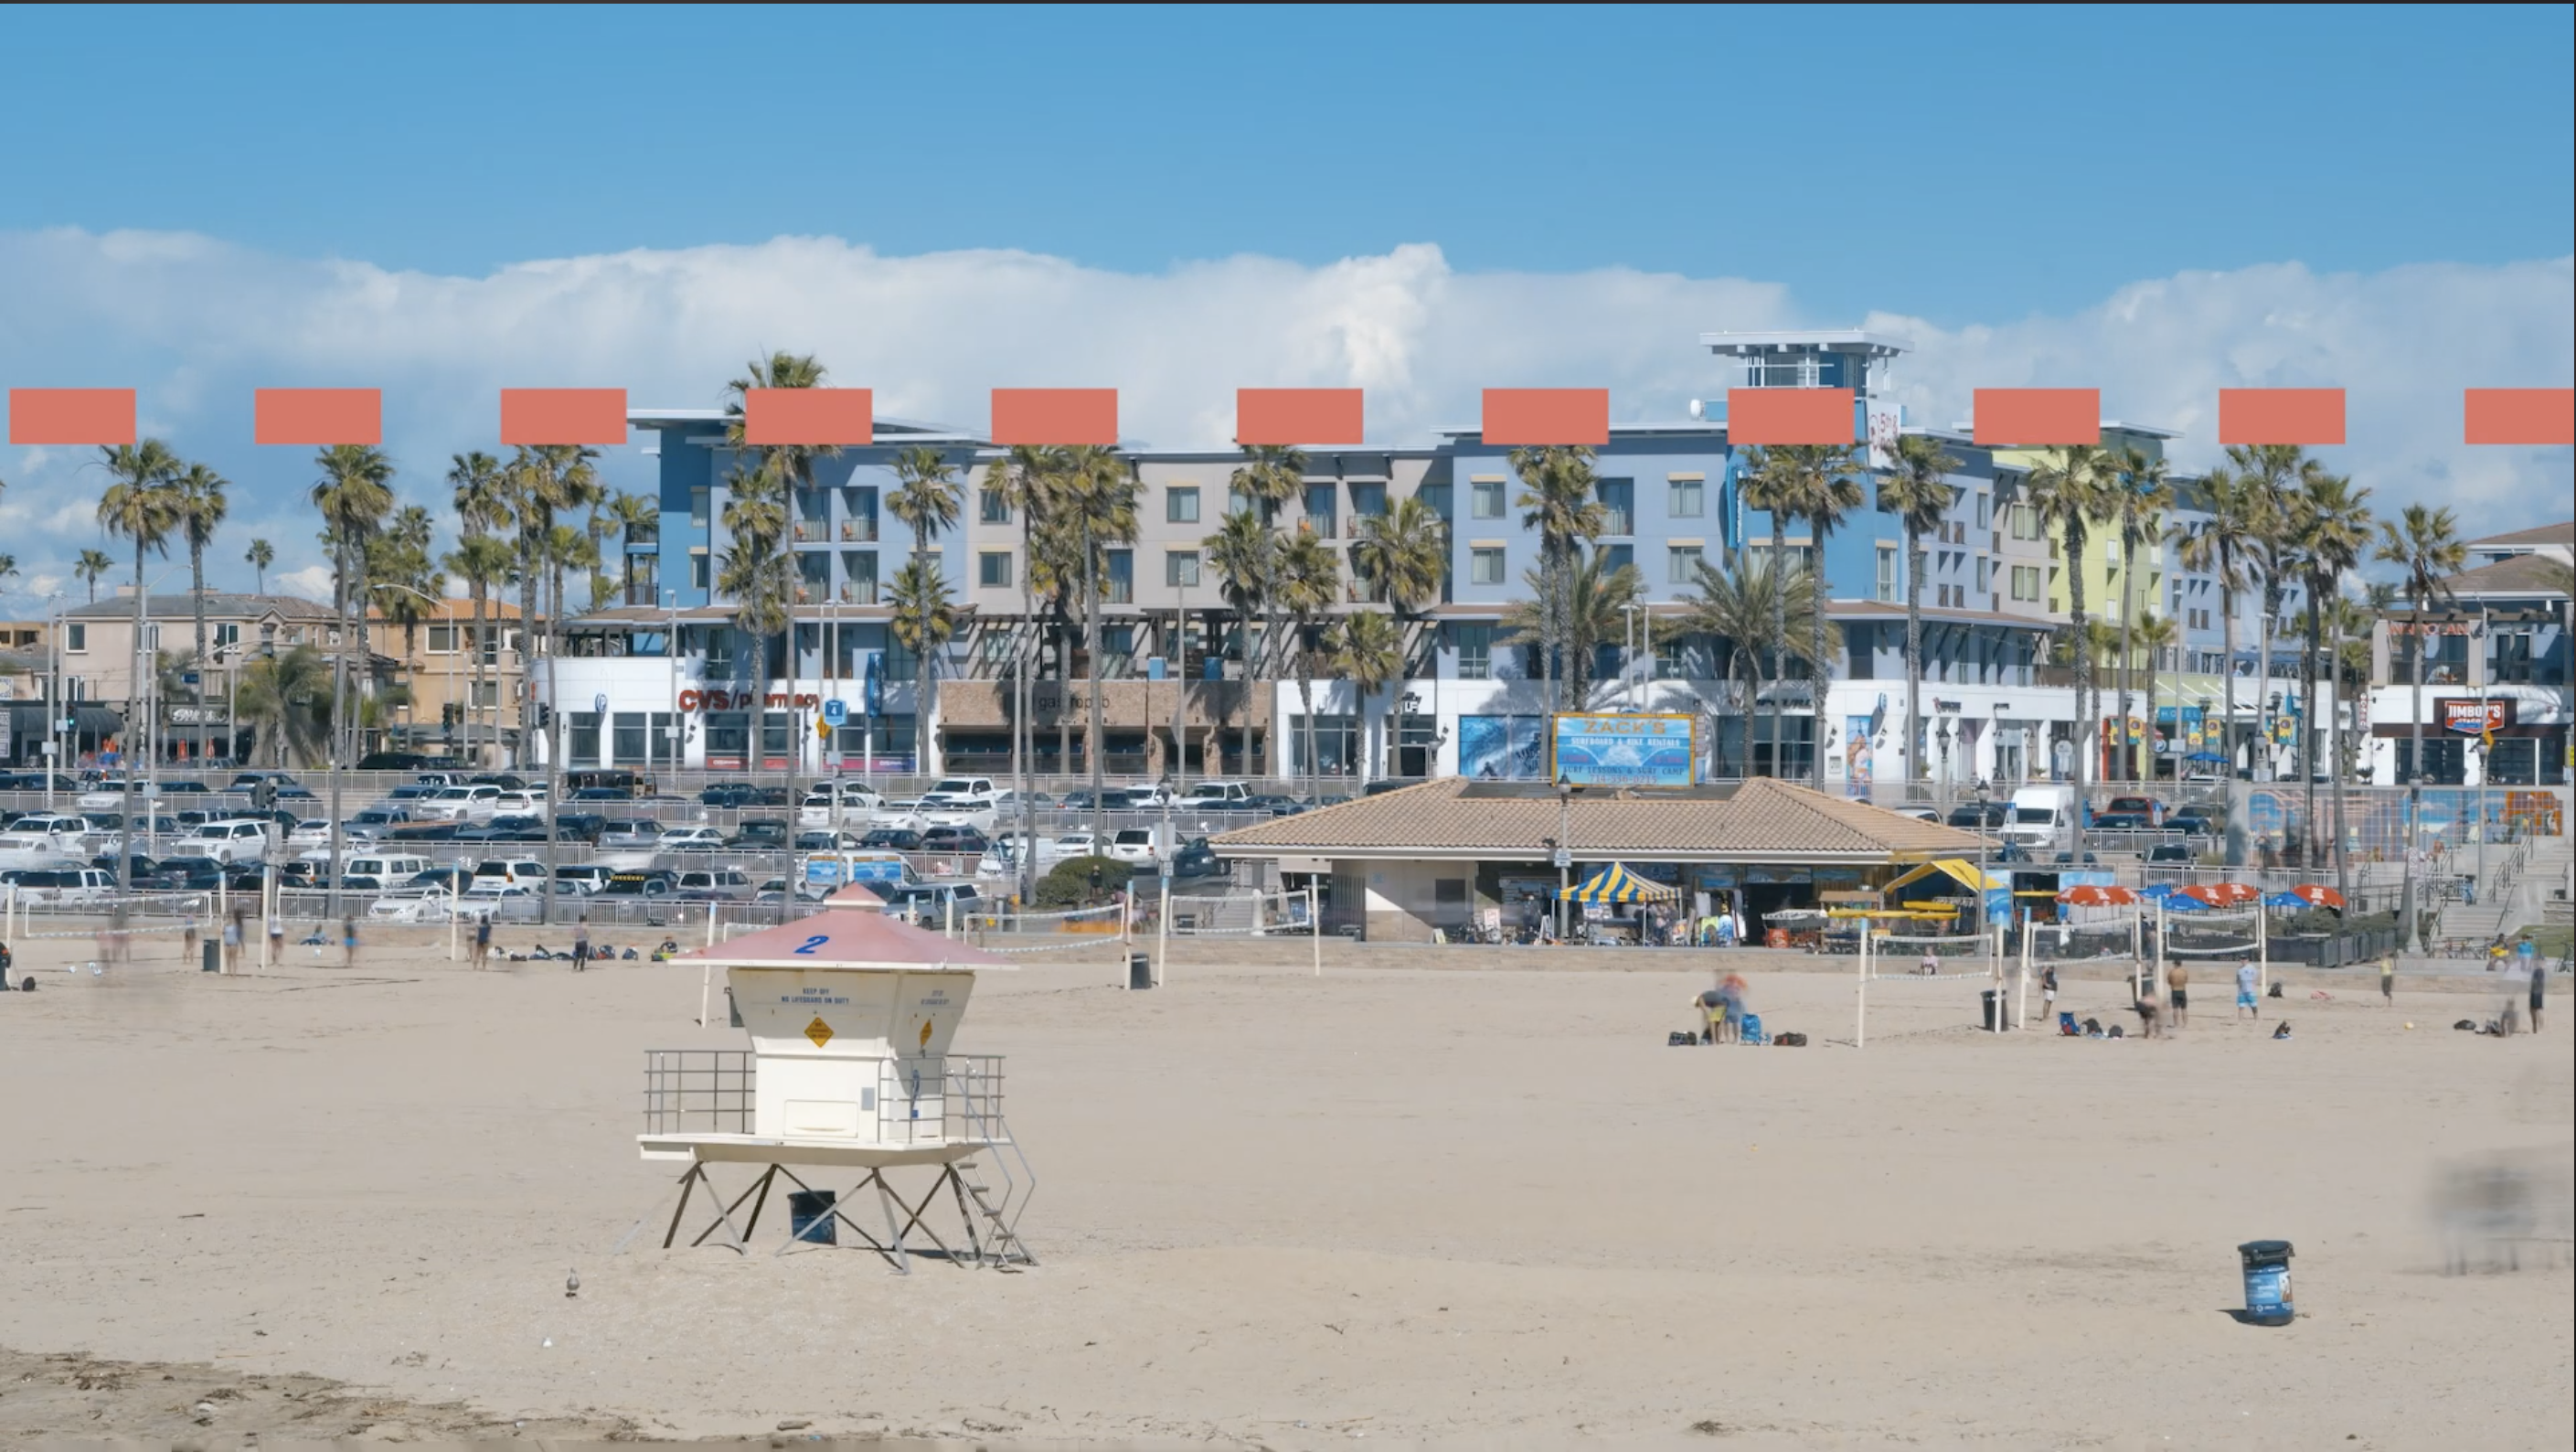 A photo of Huntington beach with boring sky, using a dashed line to indicate good composition rules for a time lapse or hyperlapse